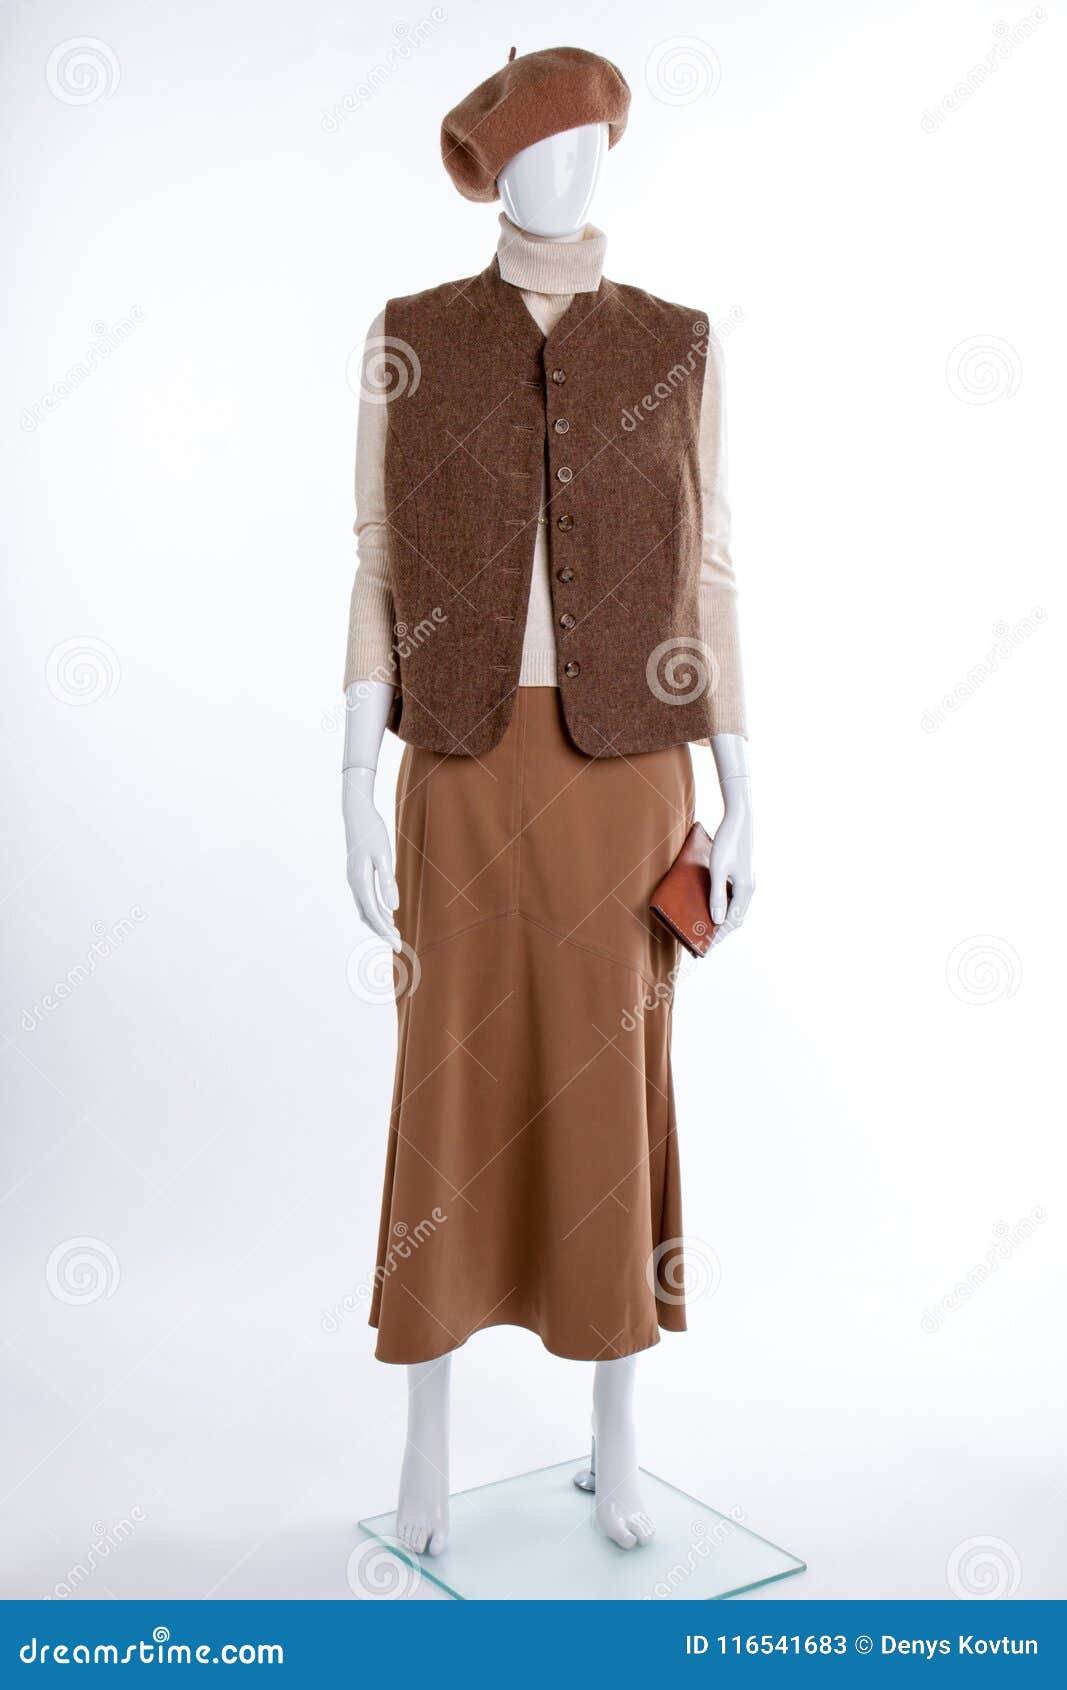 Brown Beret, Waistcoat And Skirt. Stock Image - Image of background ...